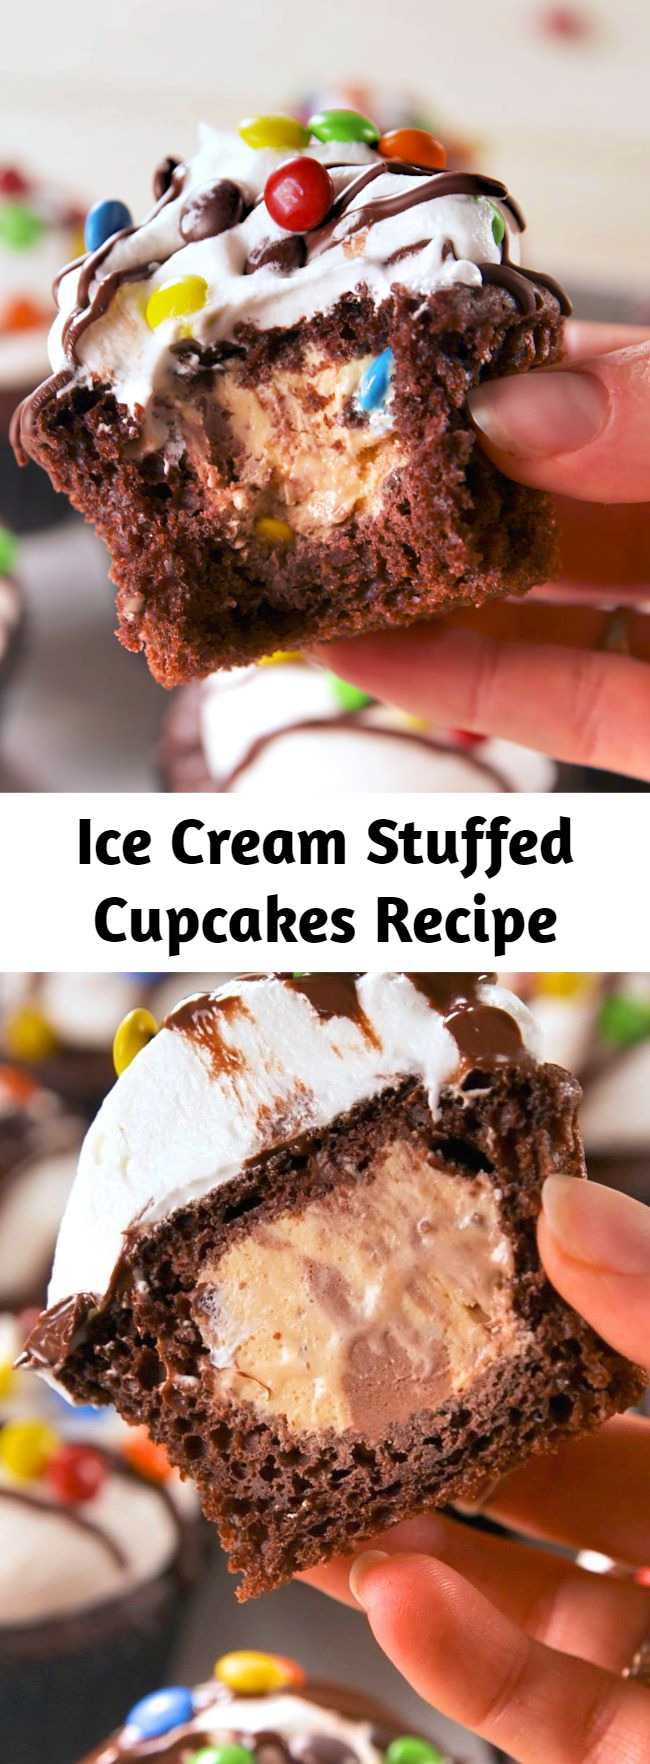 Cupcakes and ice cream all in one! It's easy to fill your favorite cupcakes with your favorite ice cream to make one easy to serve and eat party treat. The method is super easy - and the options for flavor combinations are endless! Nothing beats ice cream and cake. #easyrecipe #baking #cupcakes #dessert #icecream